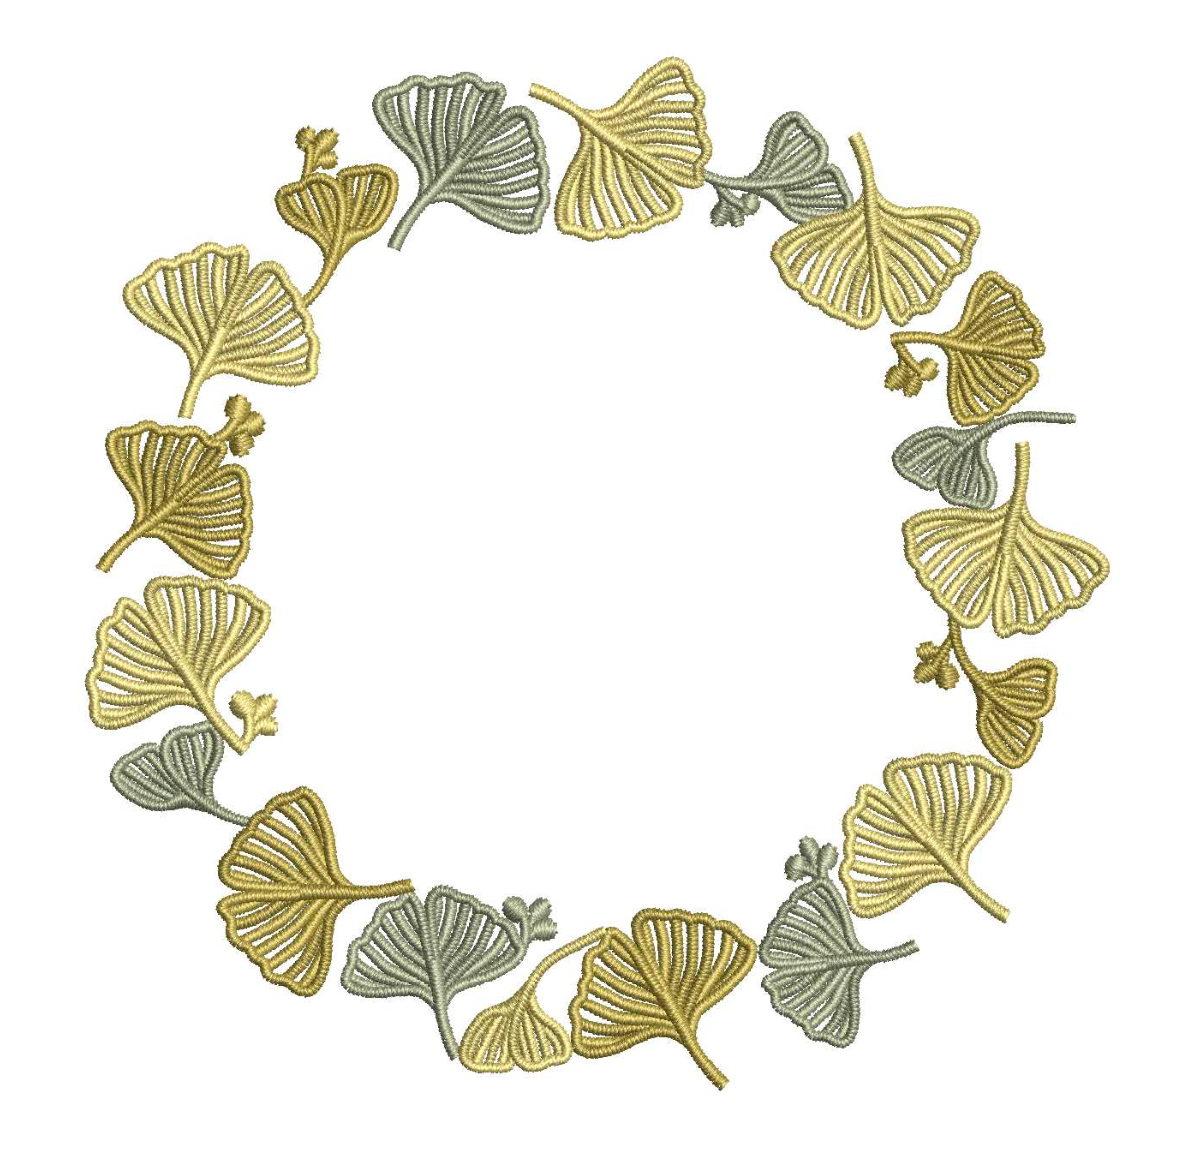 Gingko Wreath for Embroidery